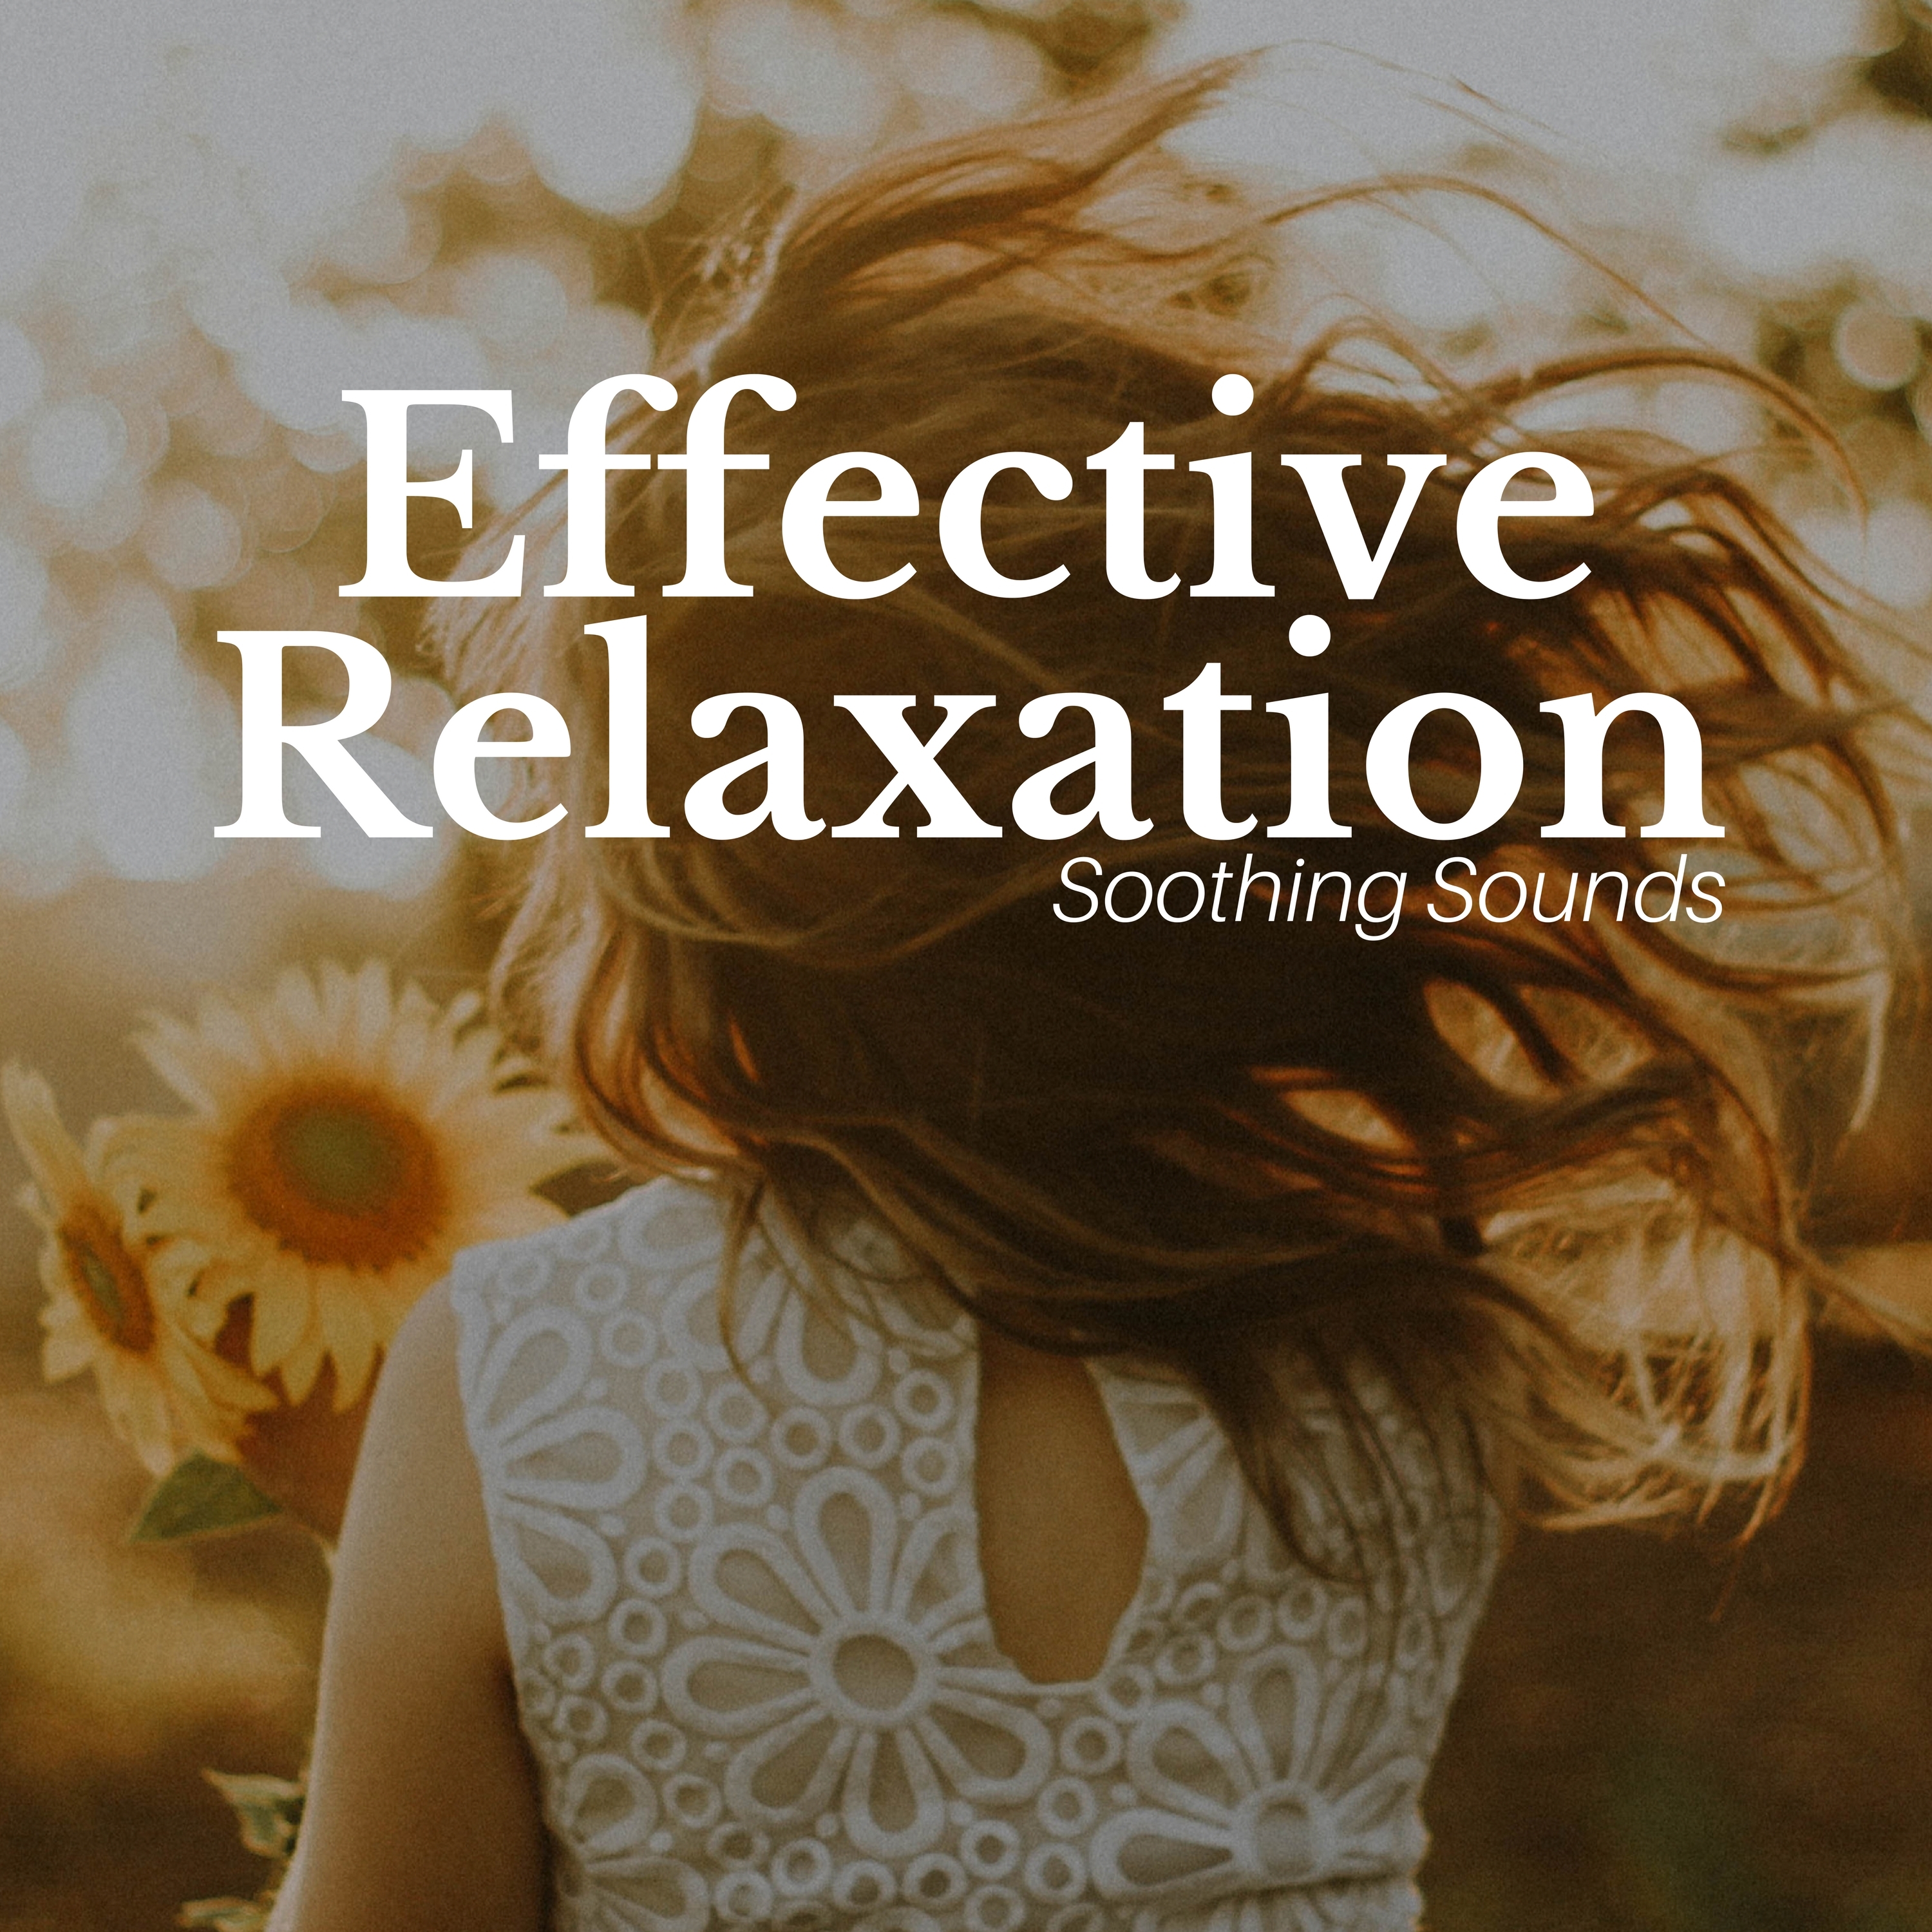 Effective Relaxation: Soothing Sounds for Sleep, Autogenic Training, Positive Relaxing Music, Natural Therapy